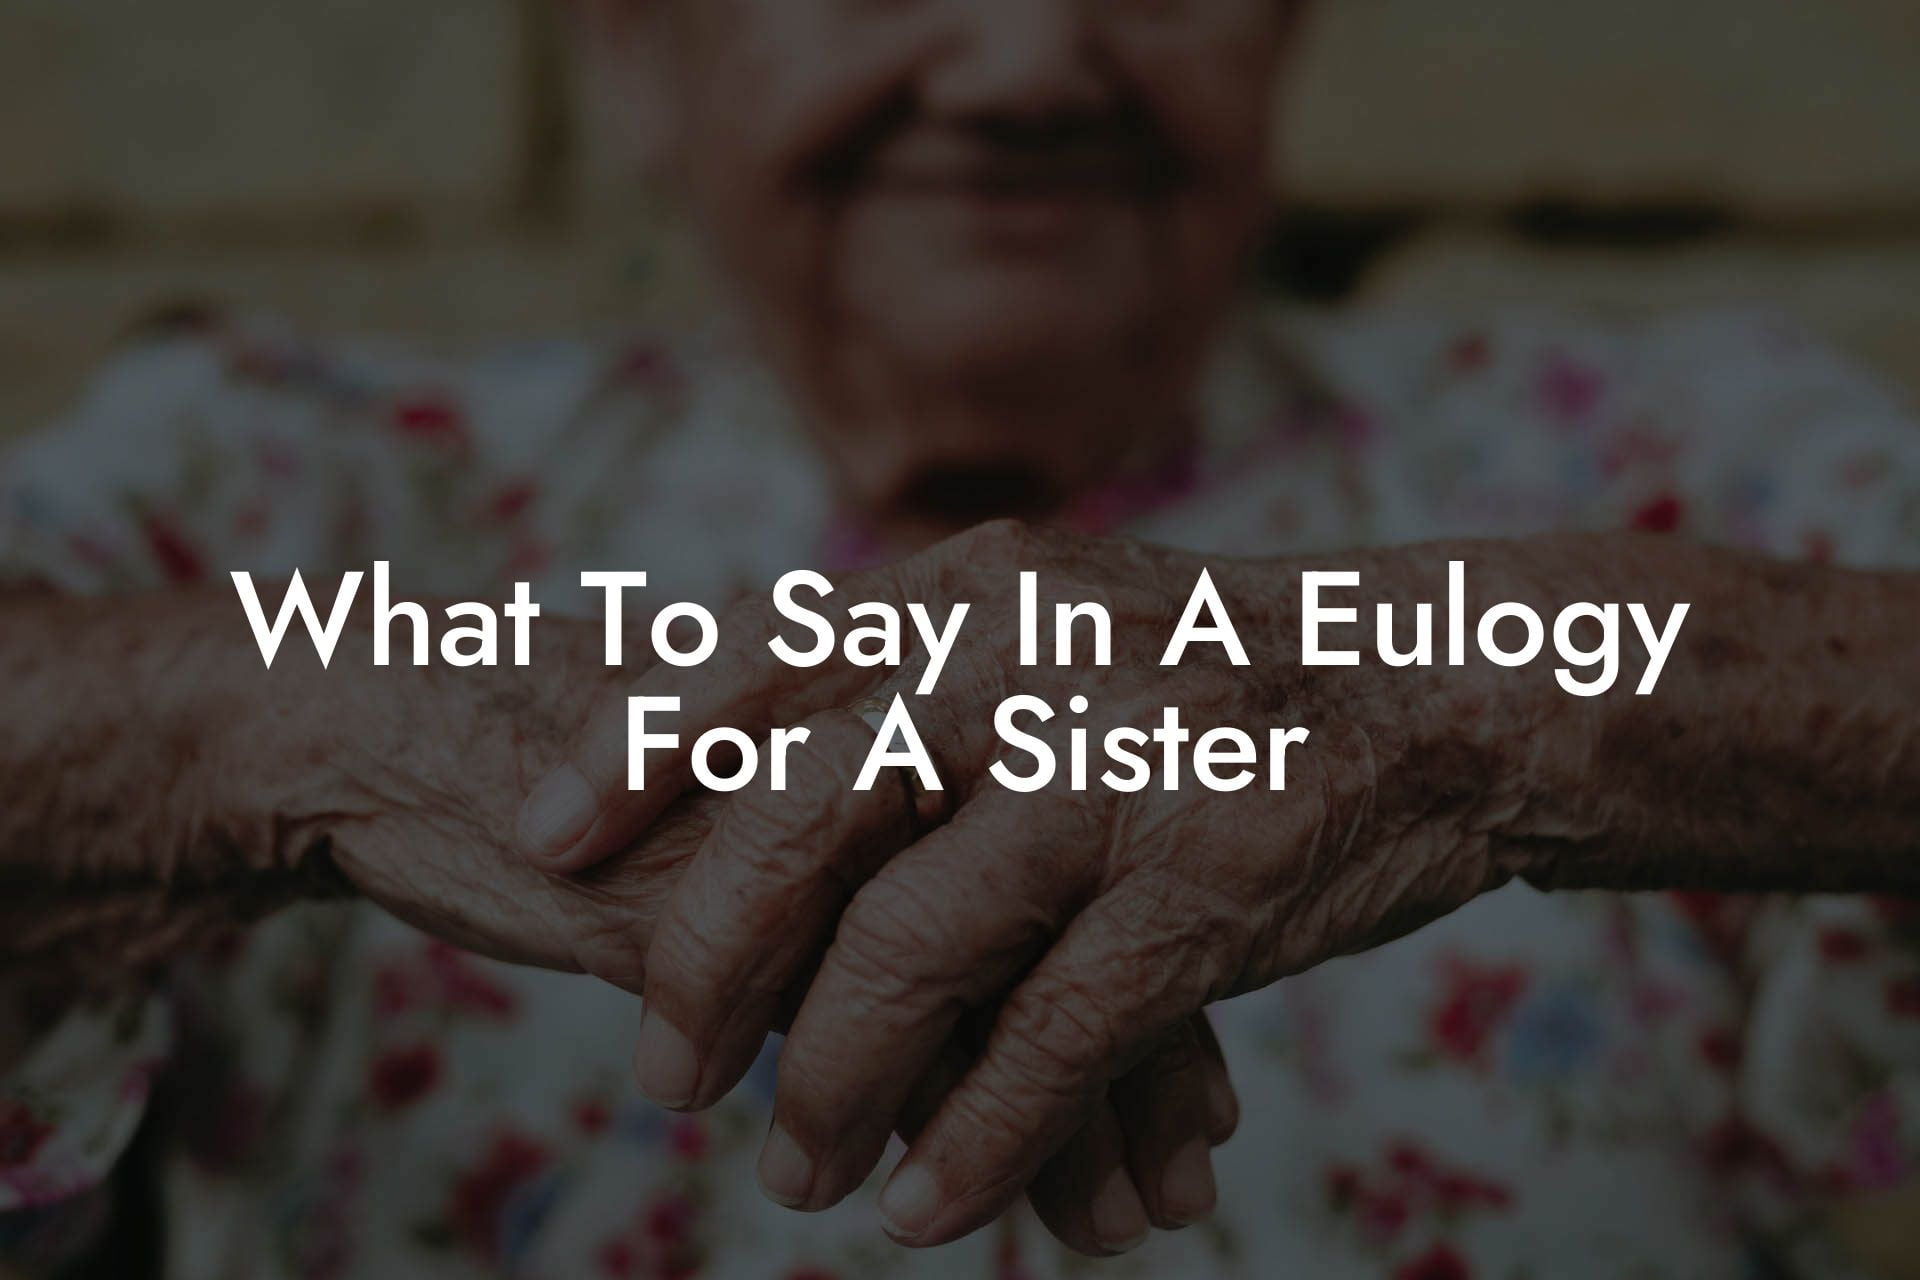 What To Say In A Eulogy For A Sister